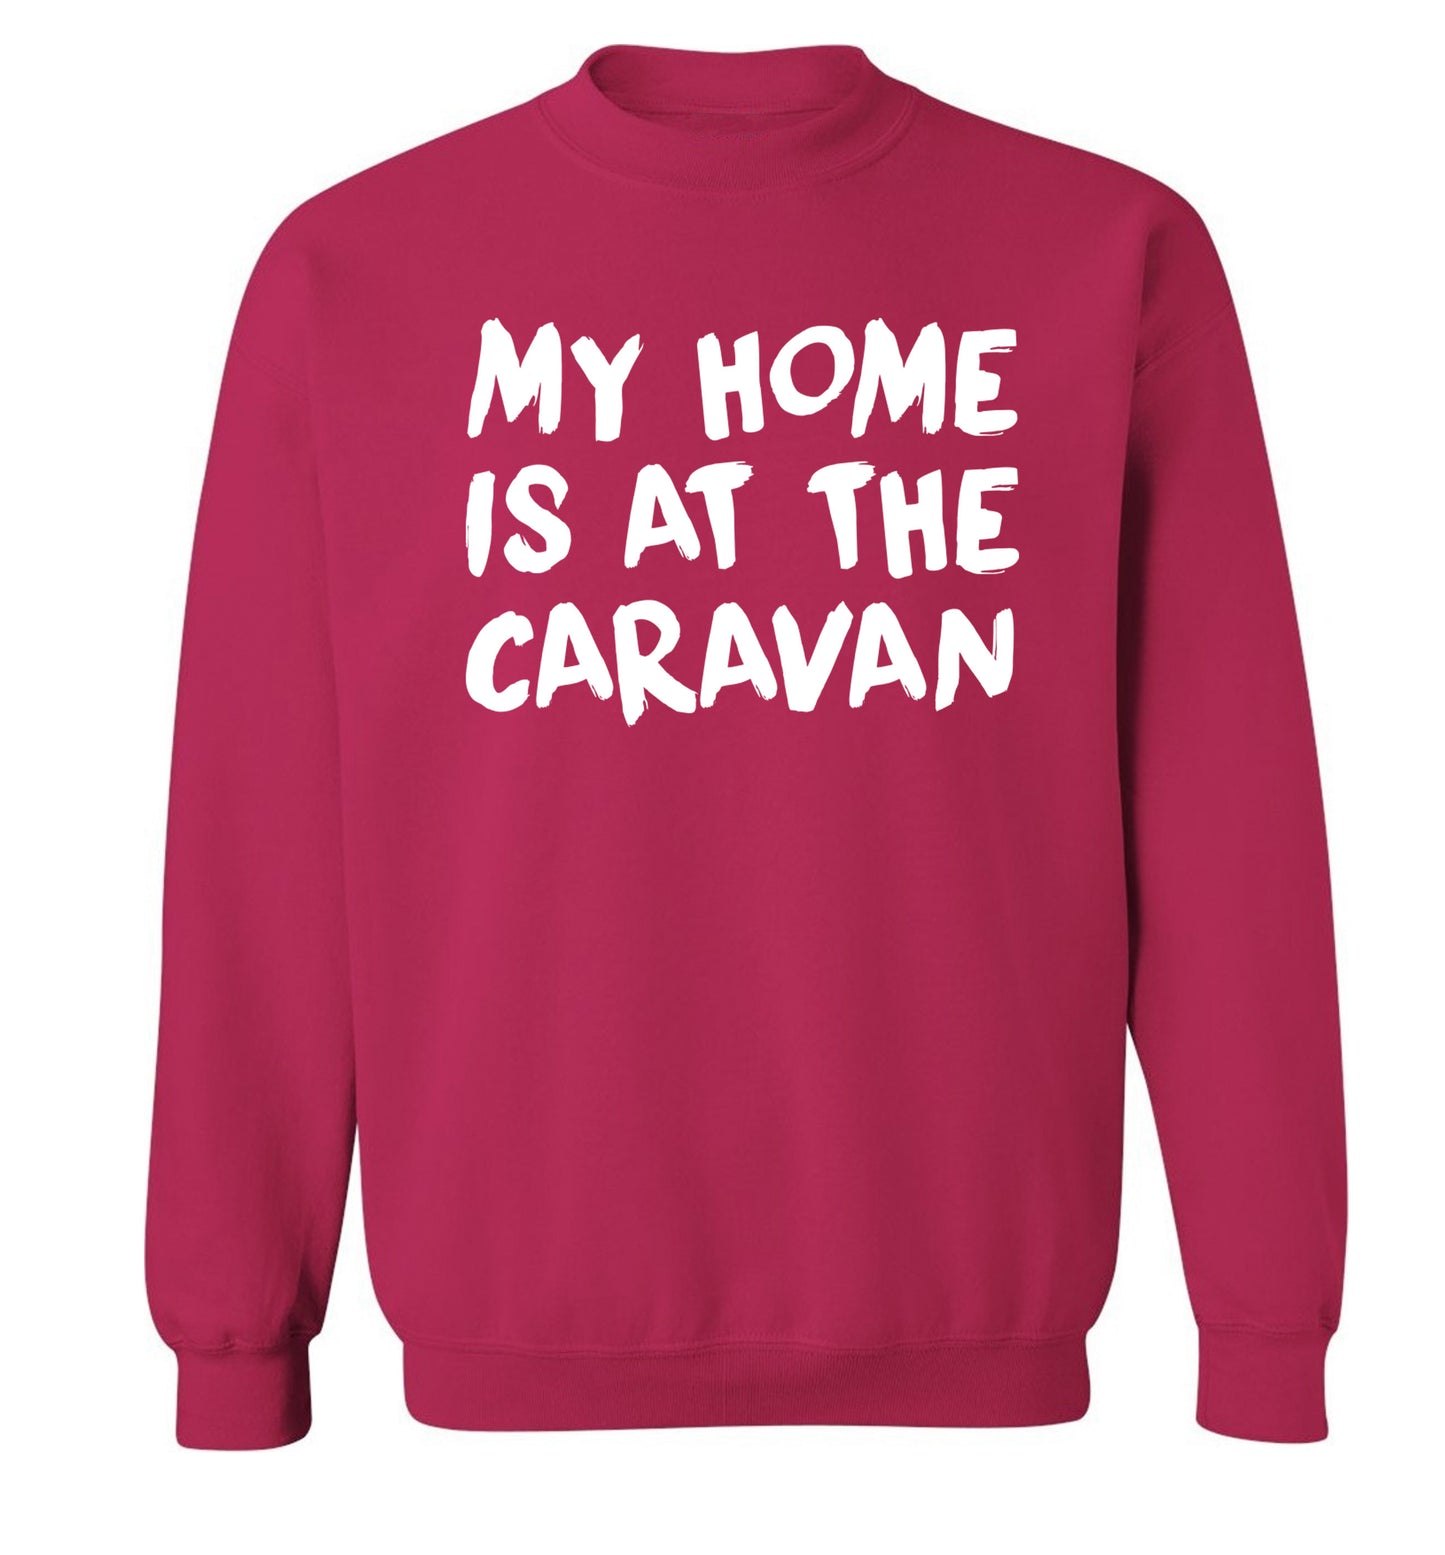 My home is at the caravan Adult's unisex pink Sweater 2XL